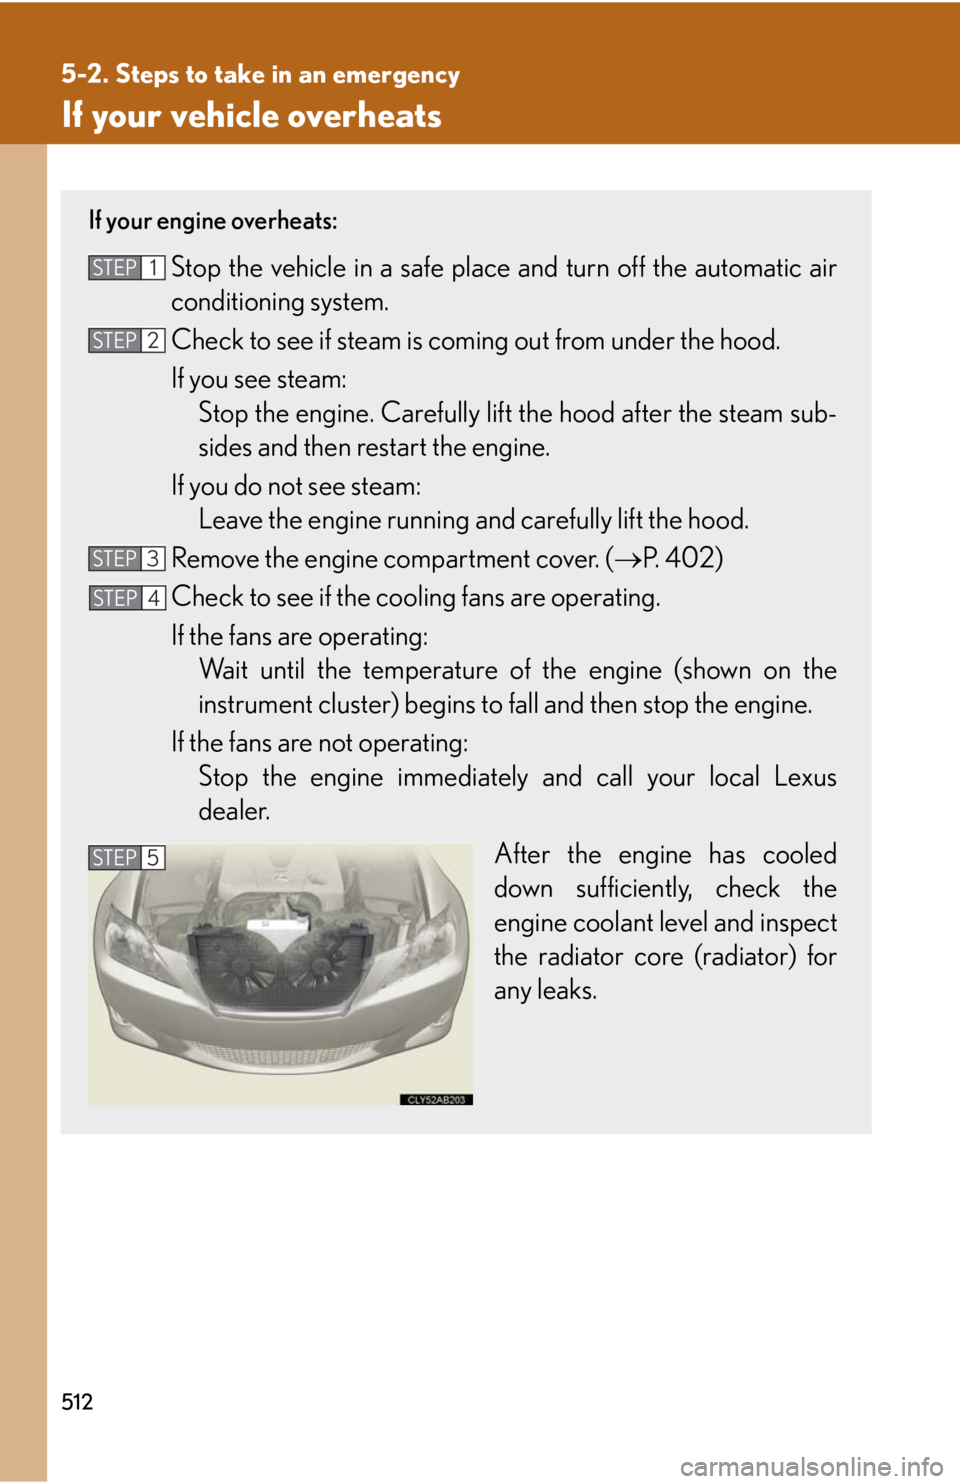 Lexus IS250 2010  Do-It-Yourself Maintenance / LEXUS 2010 IS350 IS250 OWNERS MANUAL (OM53A23U) 512
5-2. Steps to take in an emergency
If your vehicle overheats
If your engine overheats:
Stop the vehicle in a safe place and turn off the automatic air
conditioning system.
Check to see if steam is